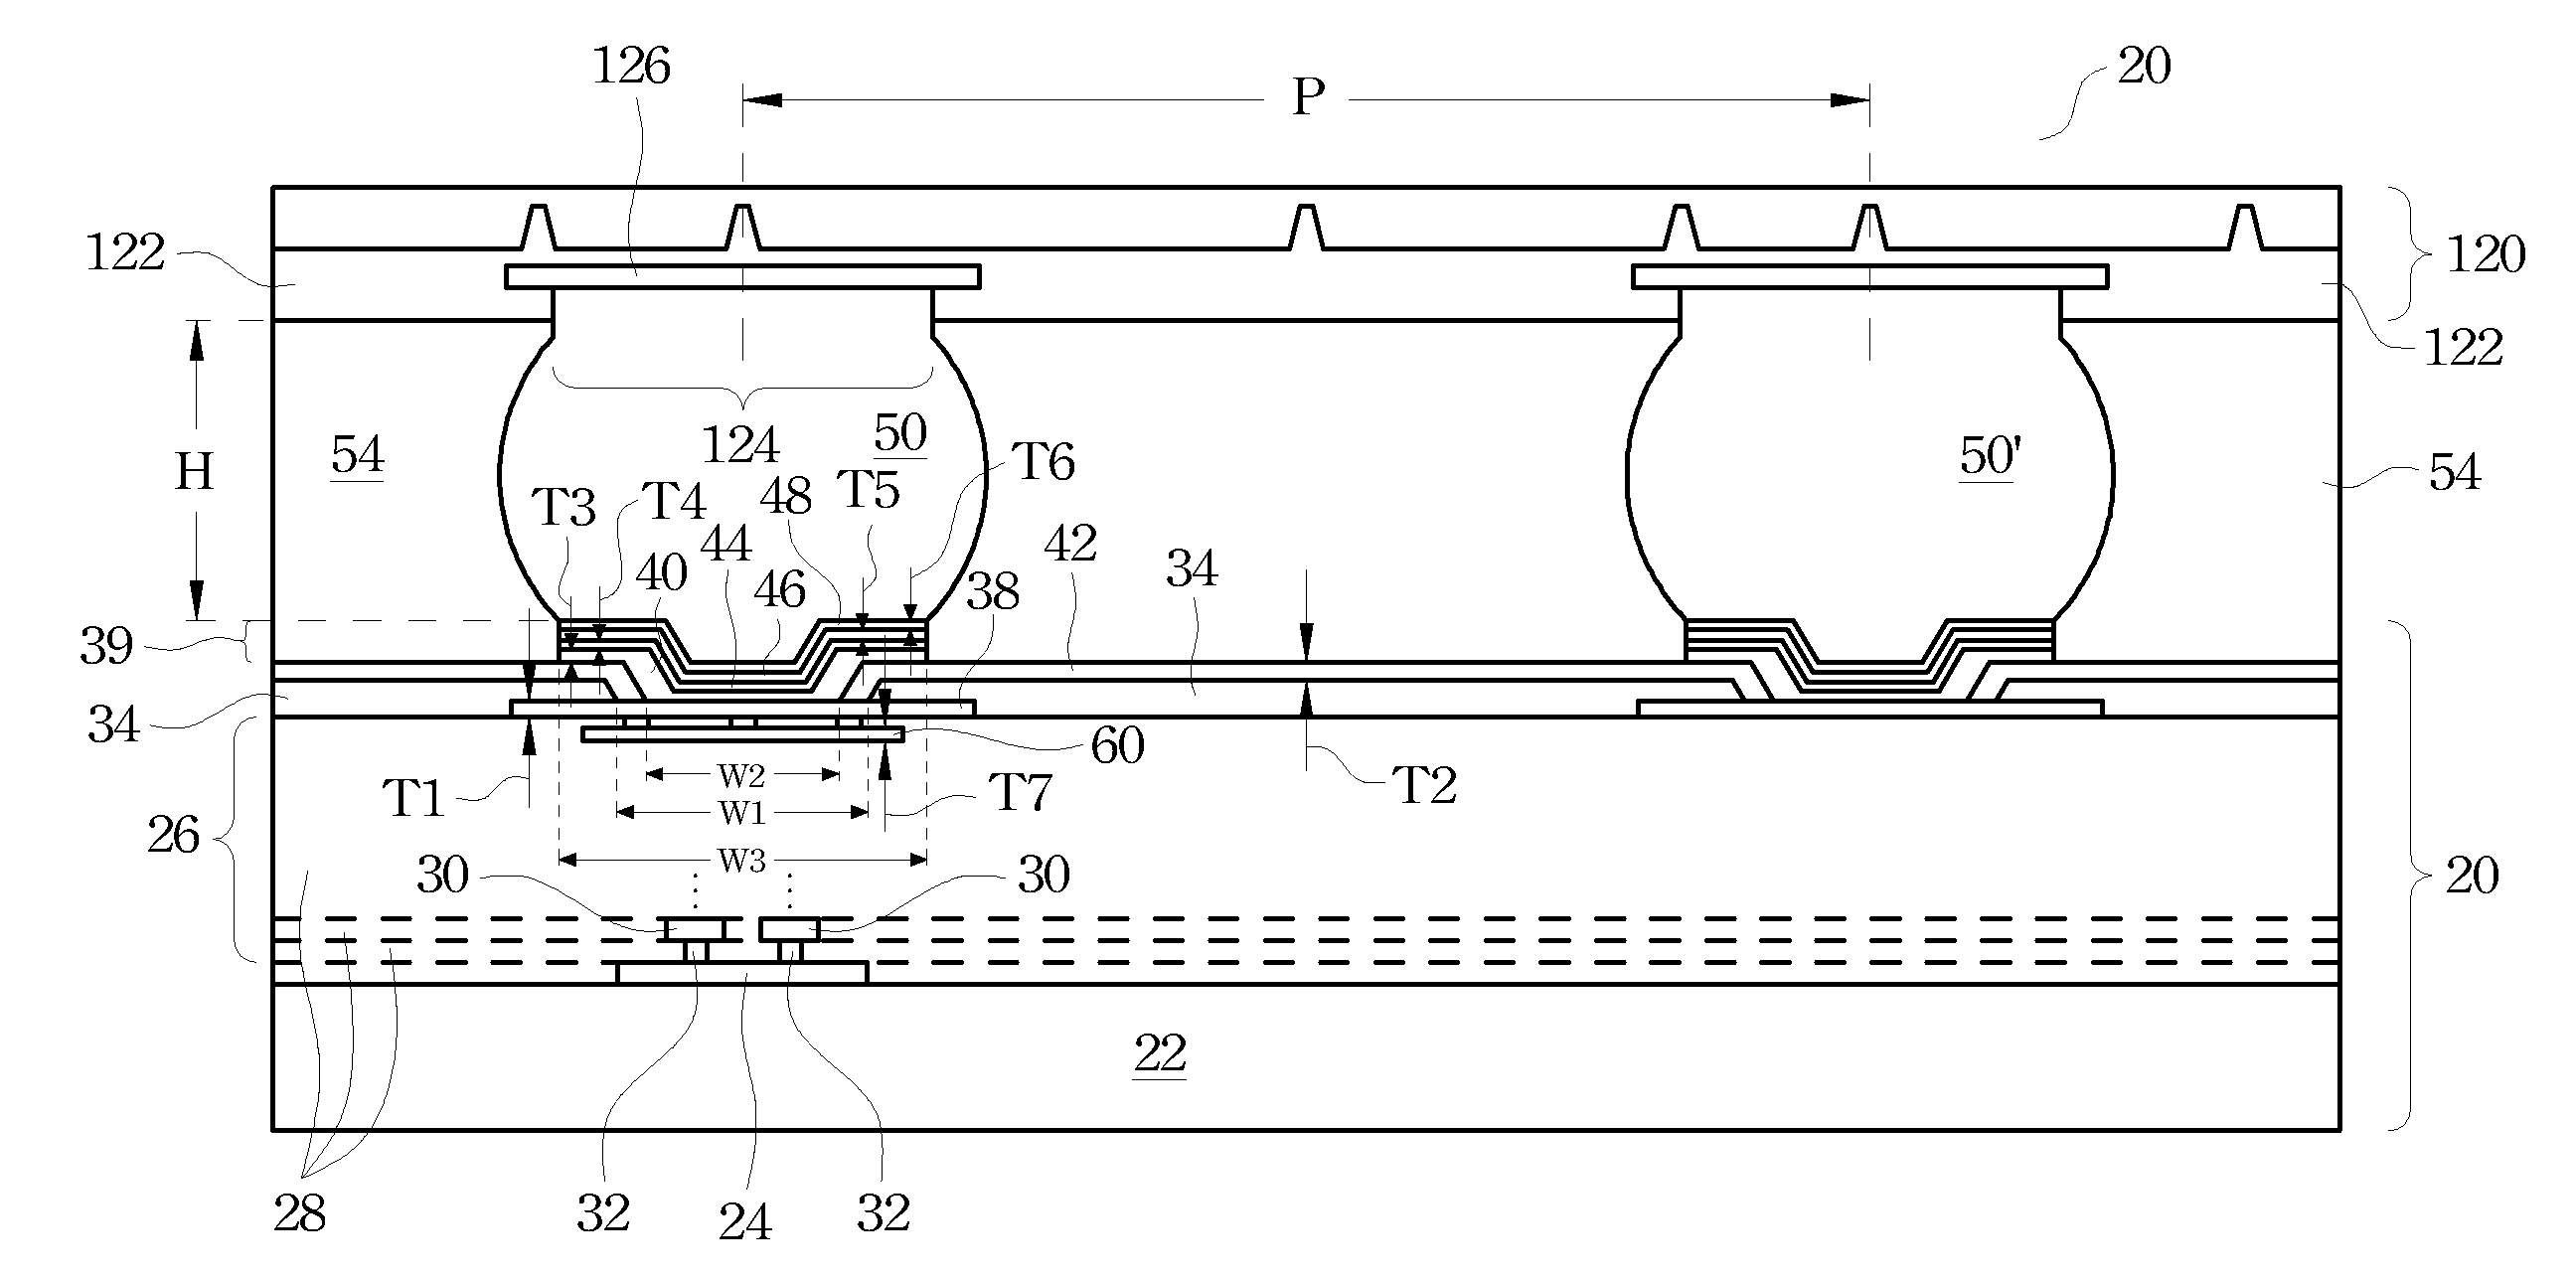 Interconnect Structures Having Lead-Free Solder Bumps